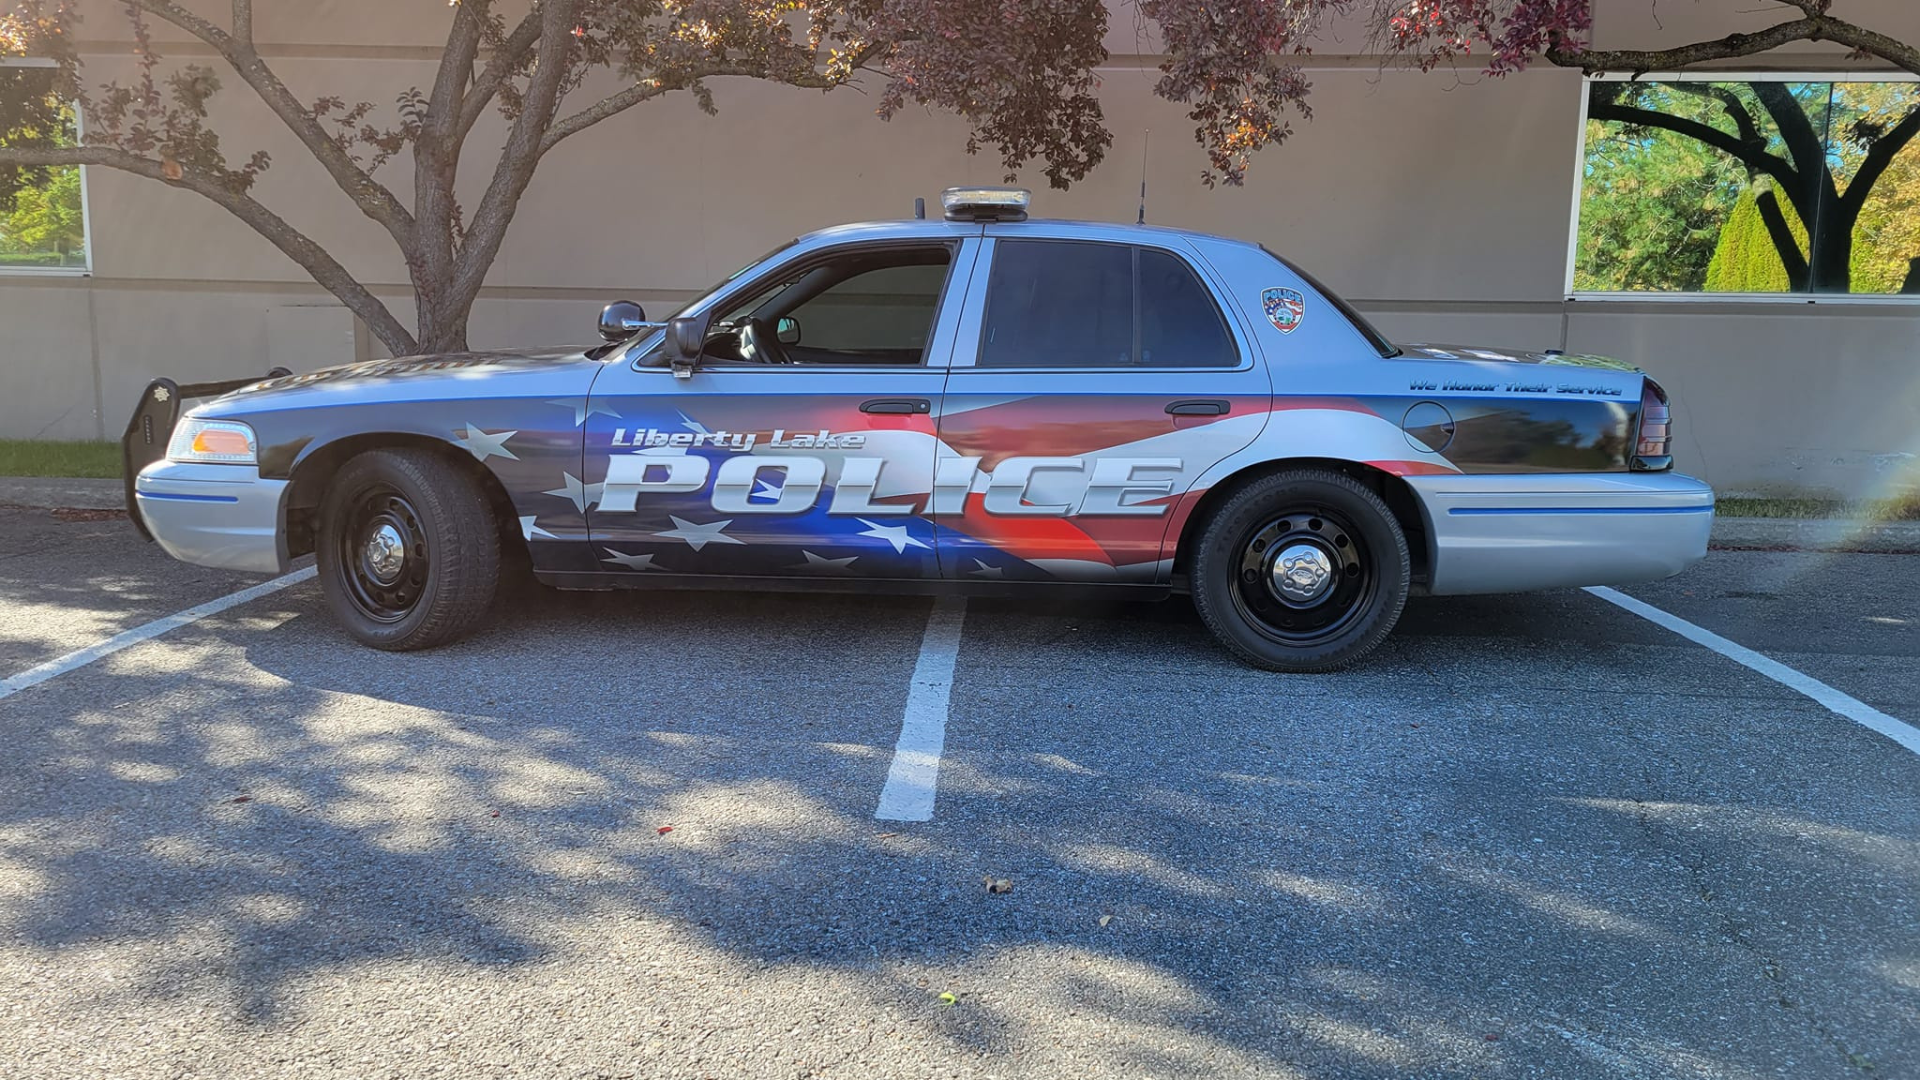 Side profile of a Liberty Lake Police vehicle parked in a parking lot, highlighting the patriotic graphics on the car.